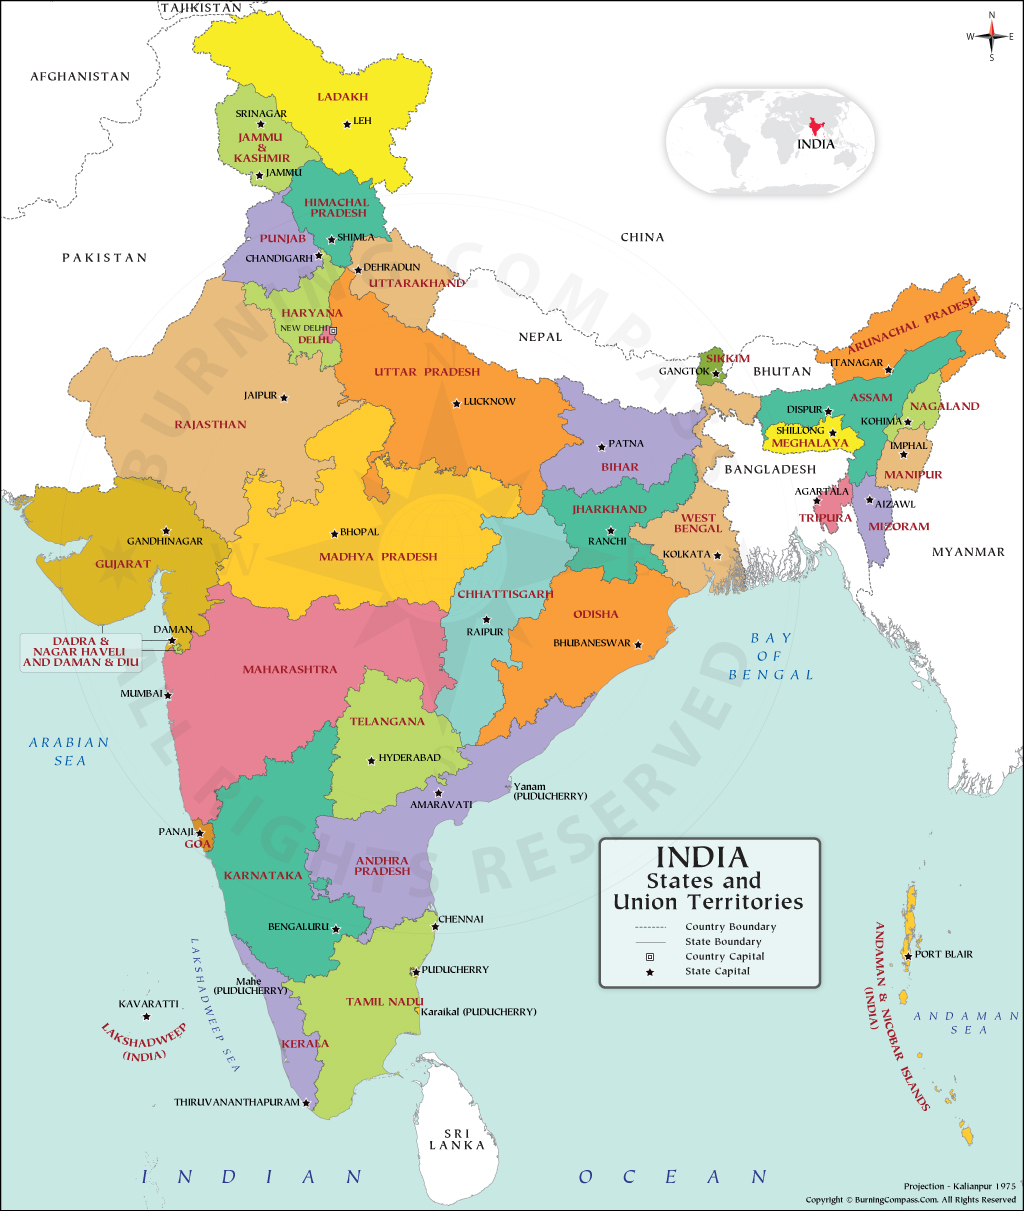 India State Map, India State and Union Territories Map